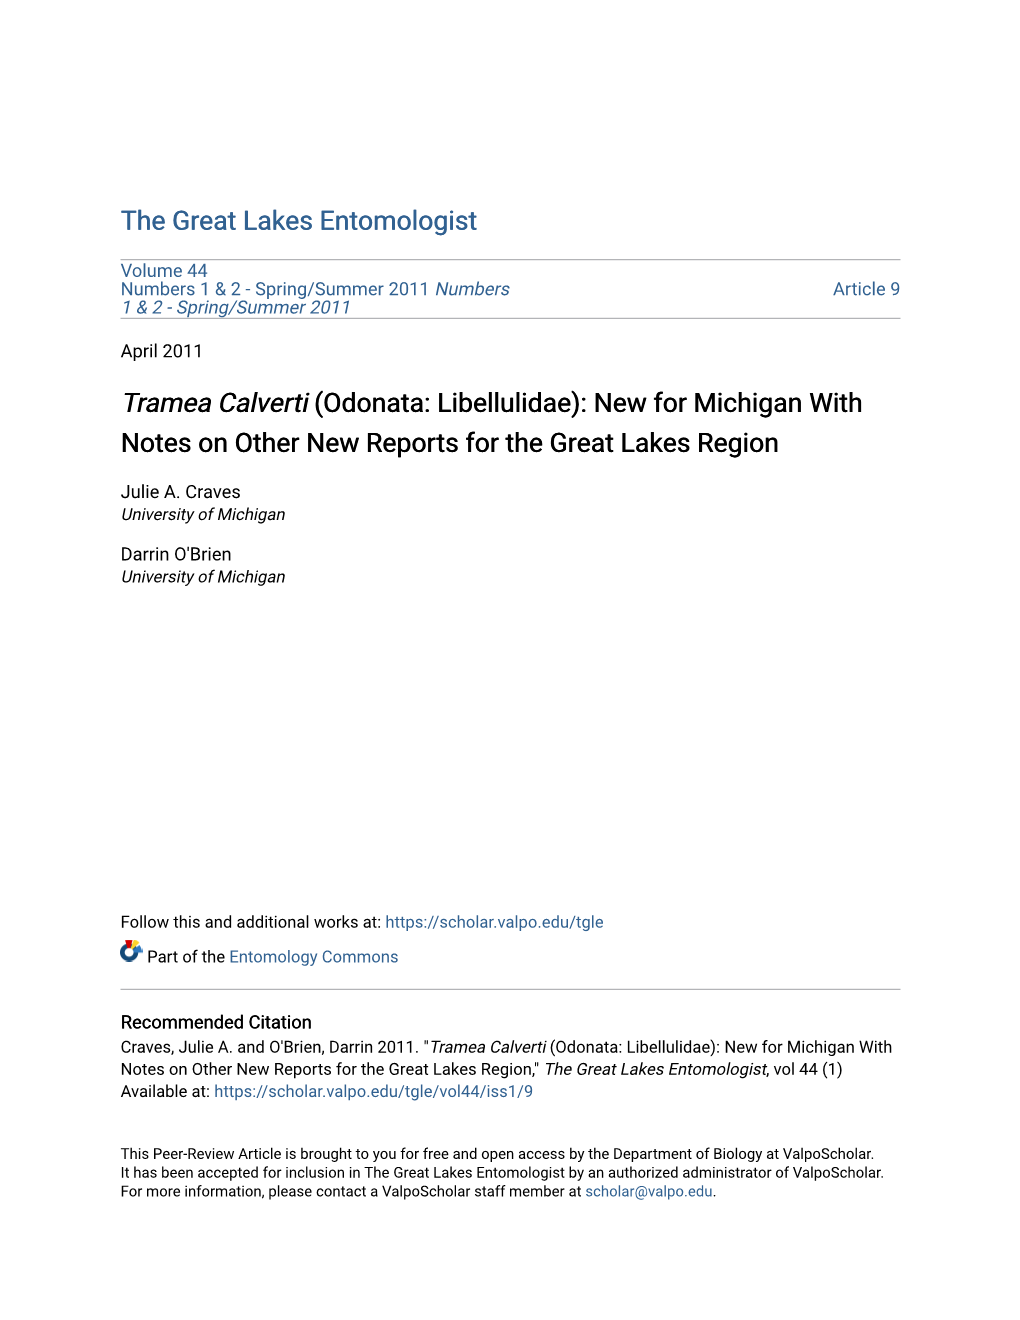 Tramea Calverti (Odonata: Libellulidae): New for Michigan with Notes on Other New Reports for the Great Lakes Region